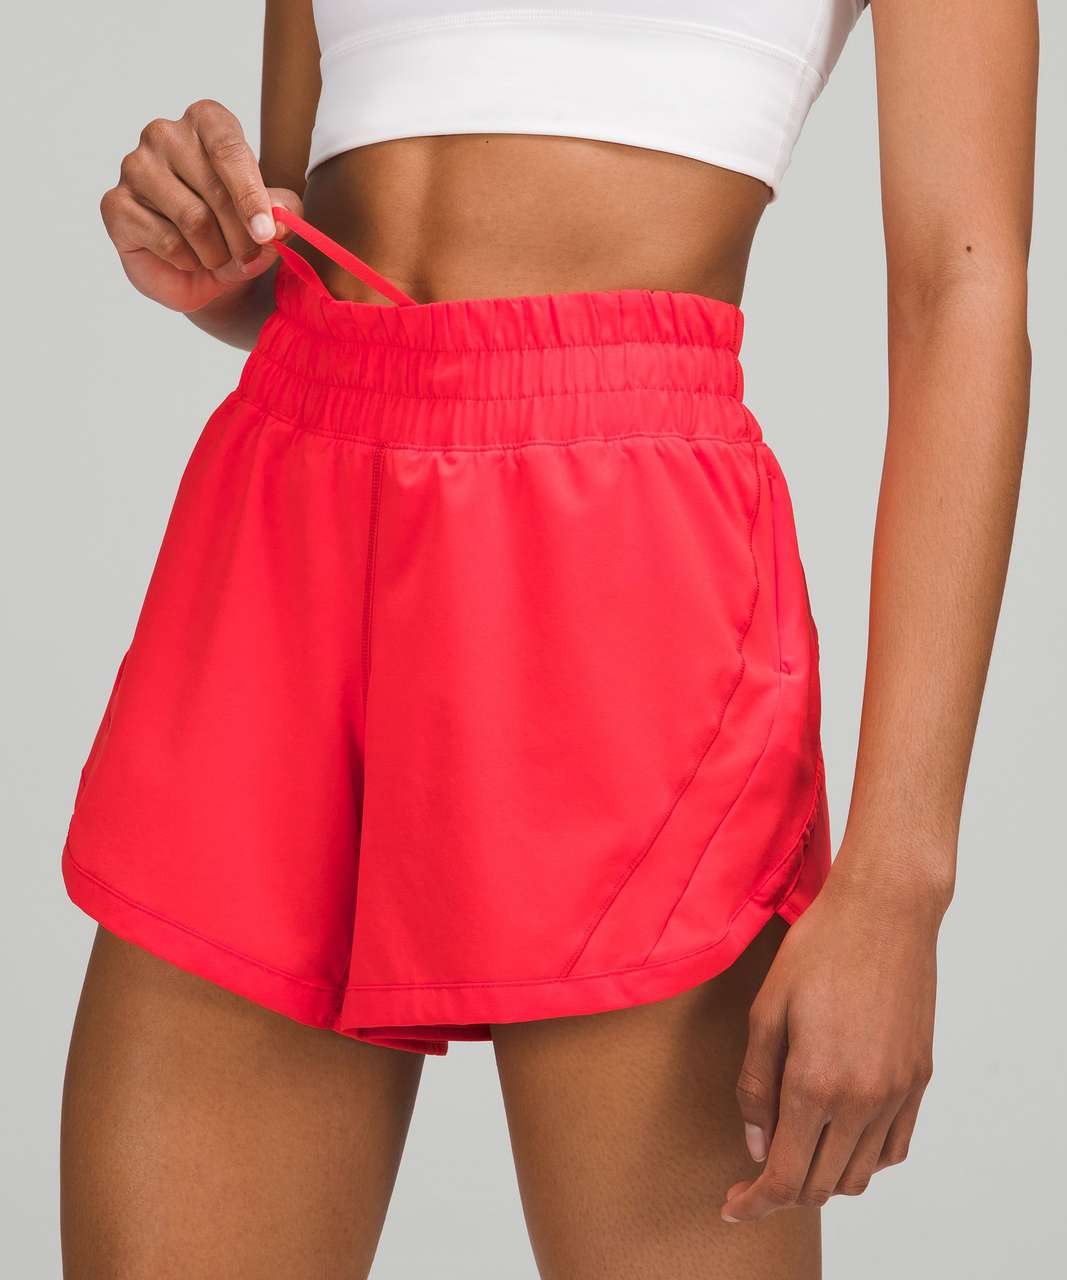 Lululemon Track That Mid-Rise Lined Short 5" - Love Red